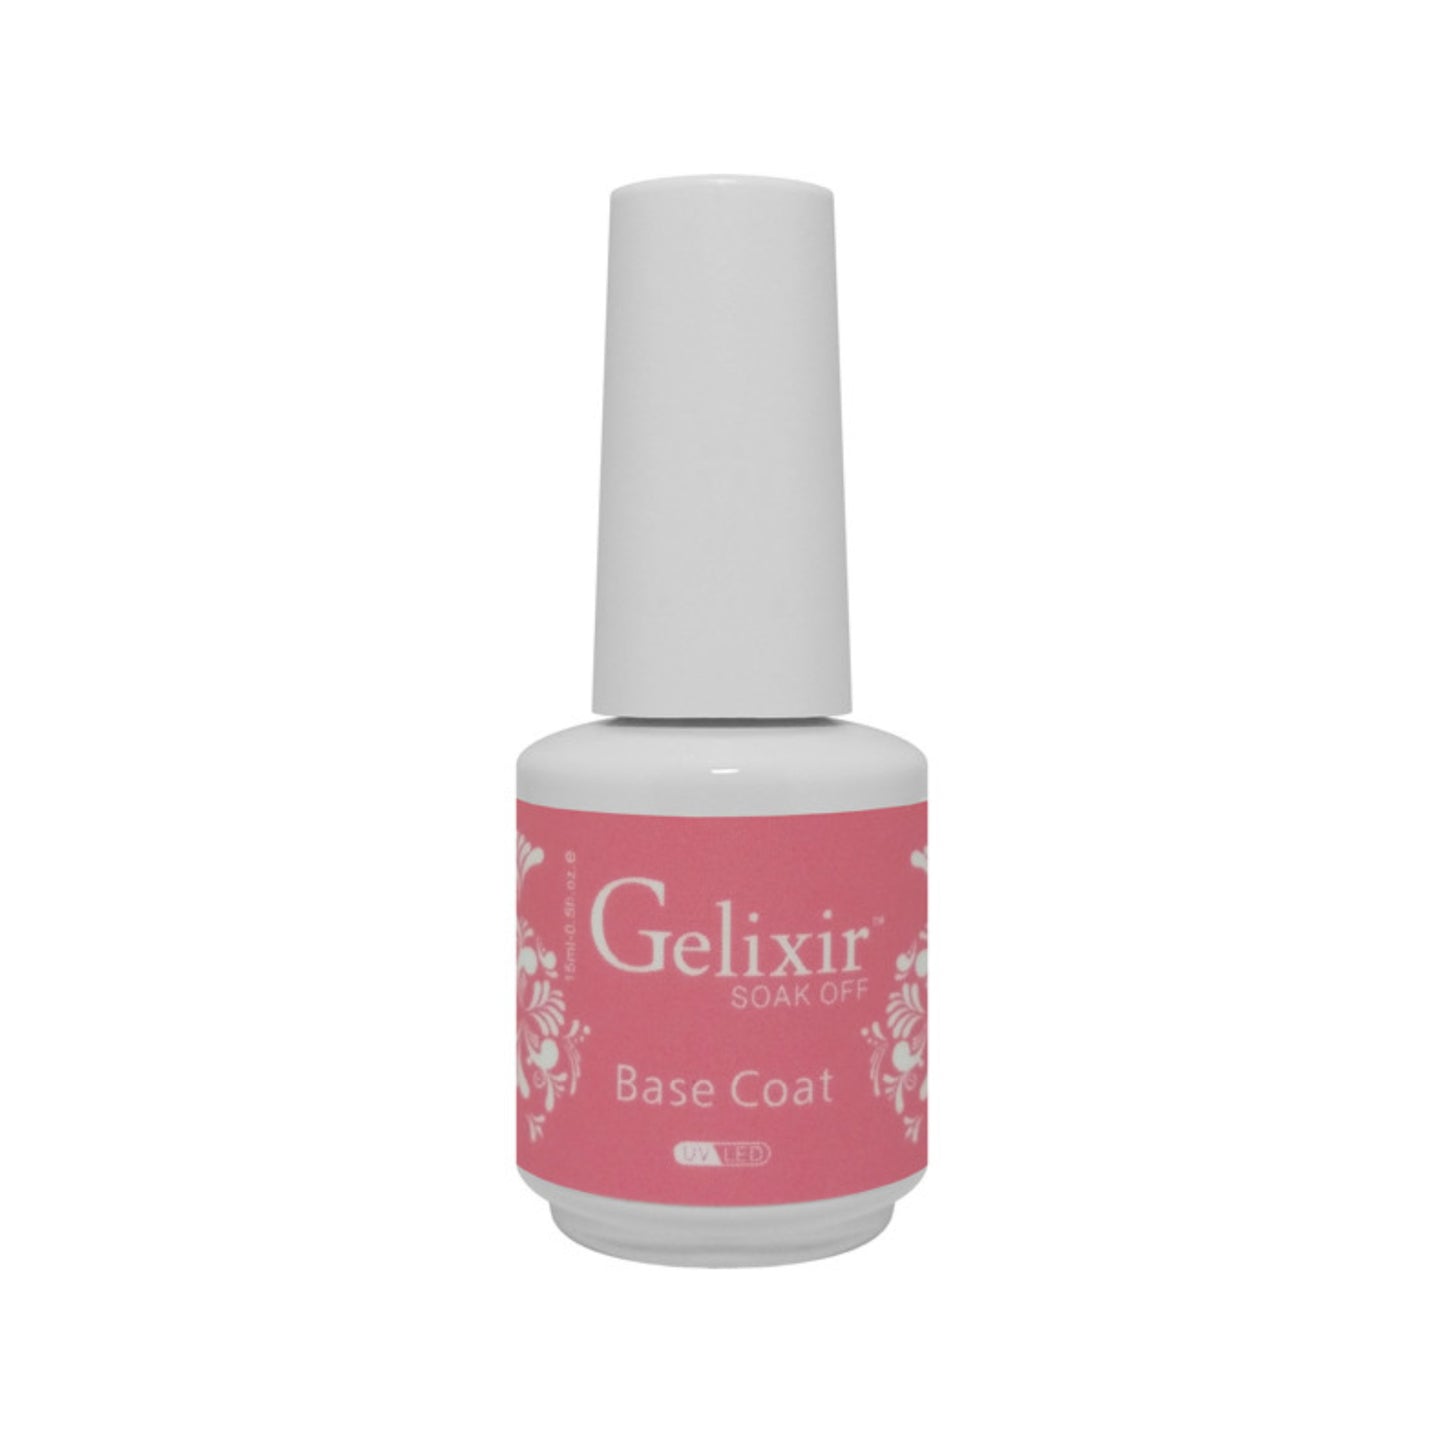 Gelixir Gel Base Coat create the adhesive bond between the nail plate and gel products